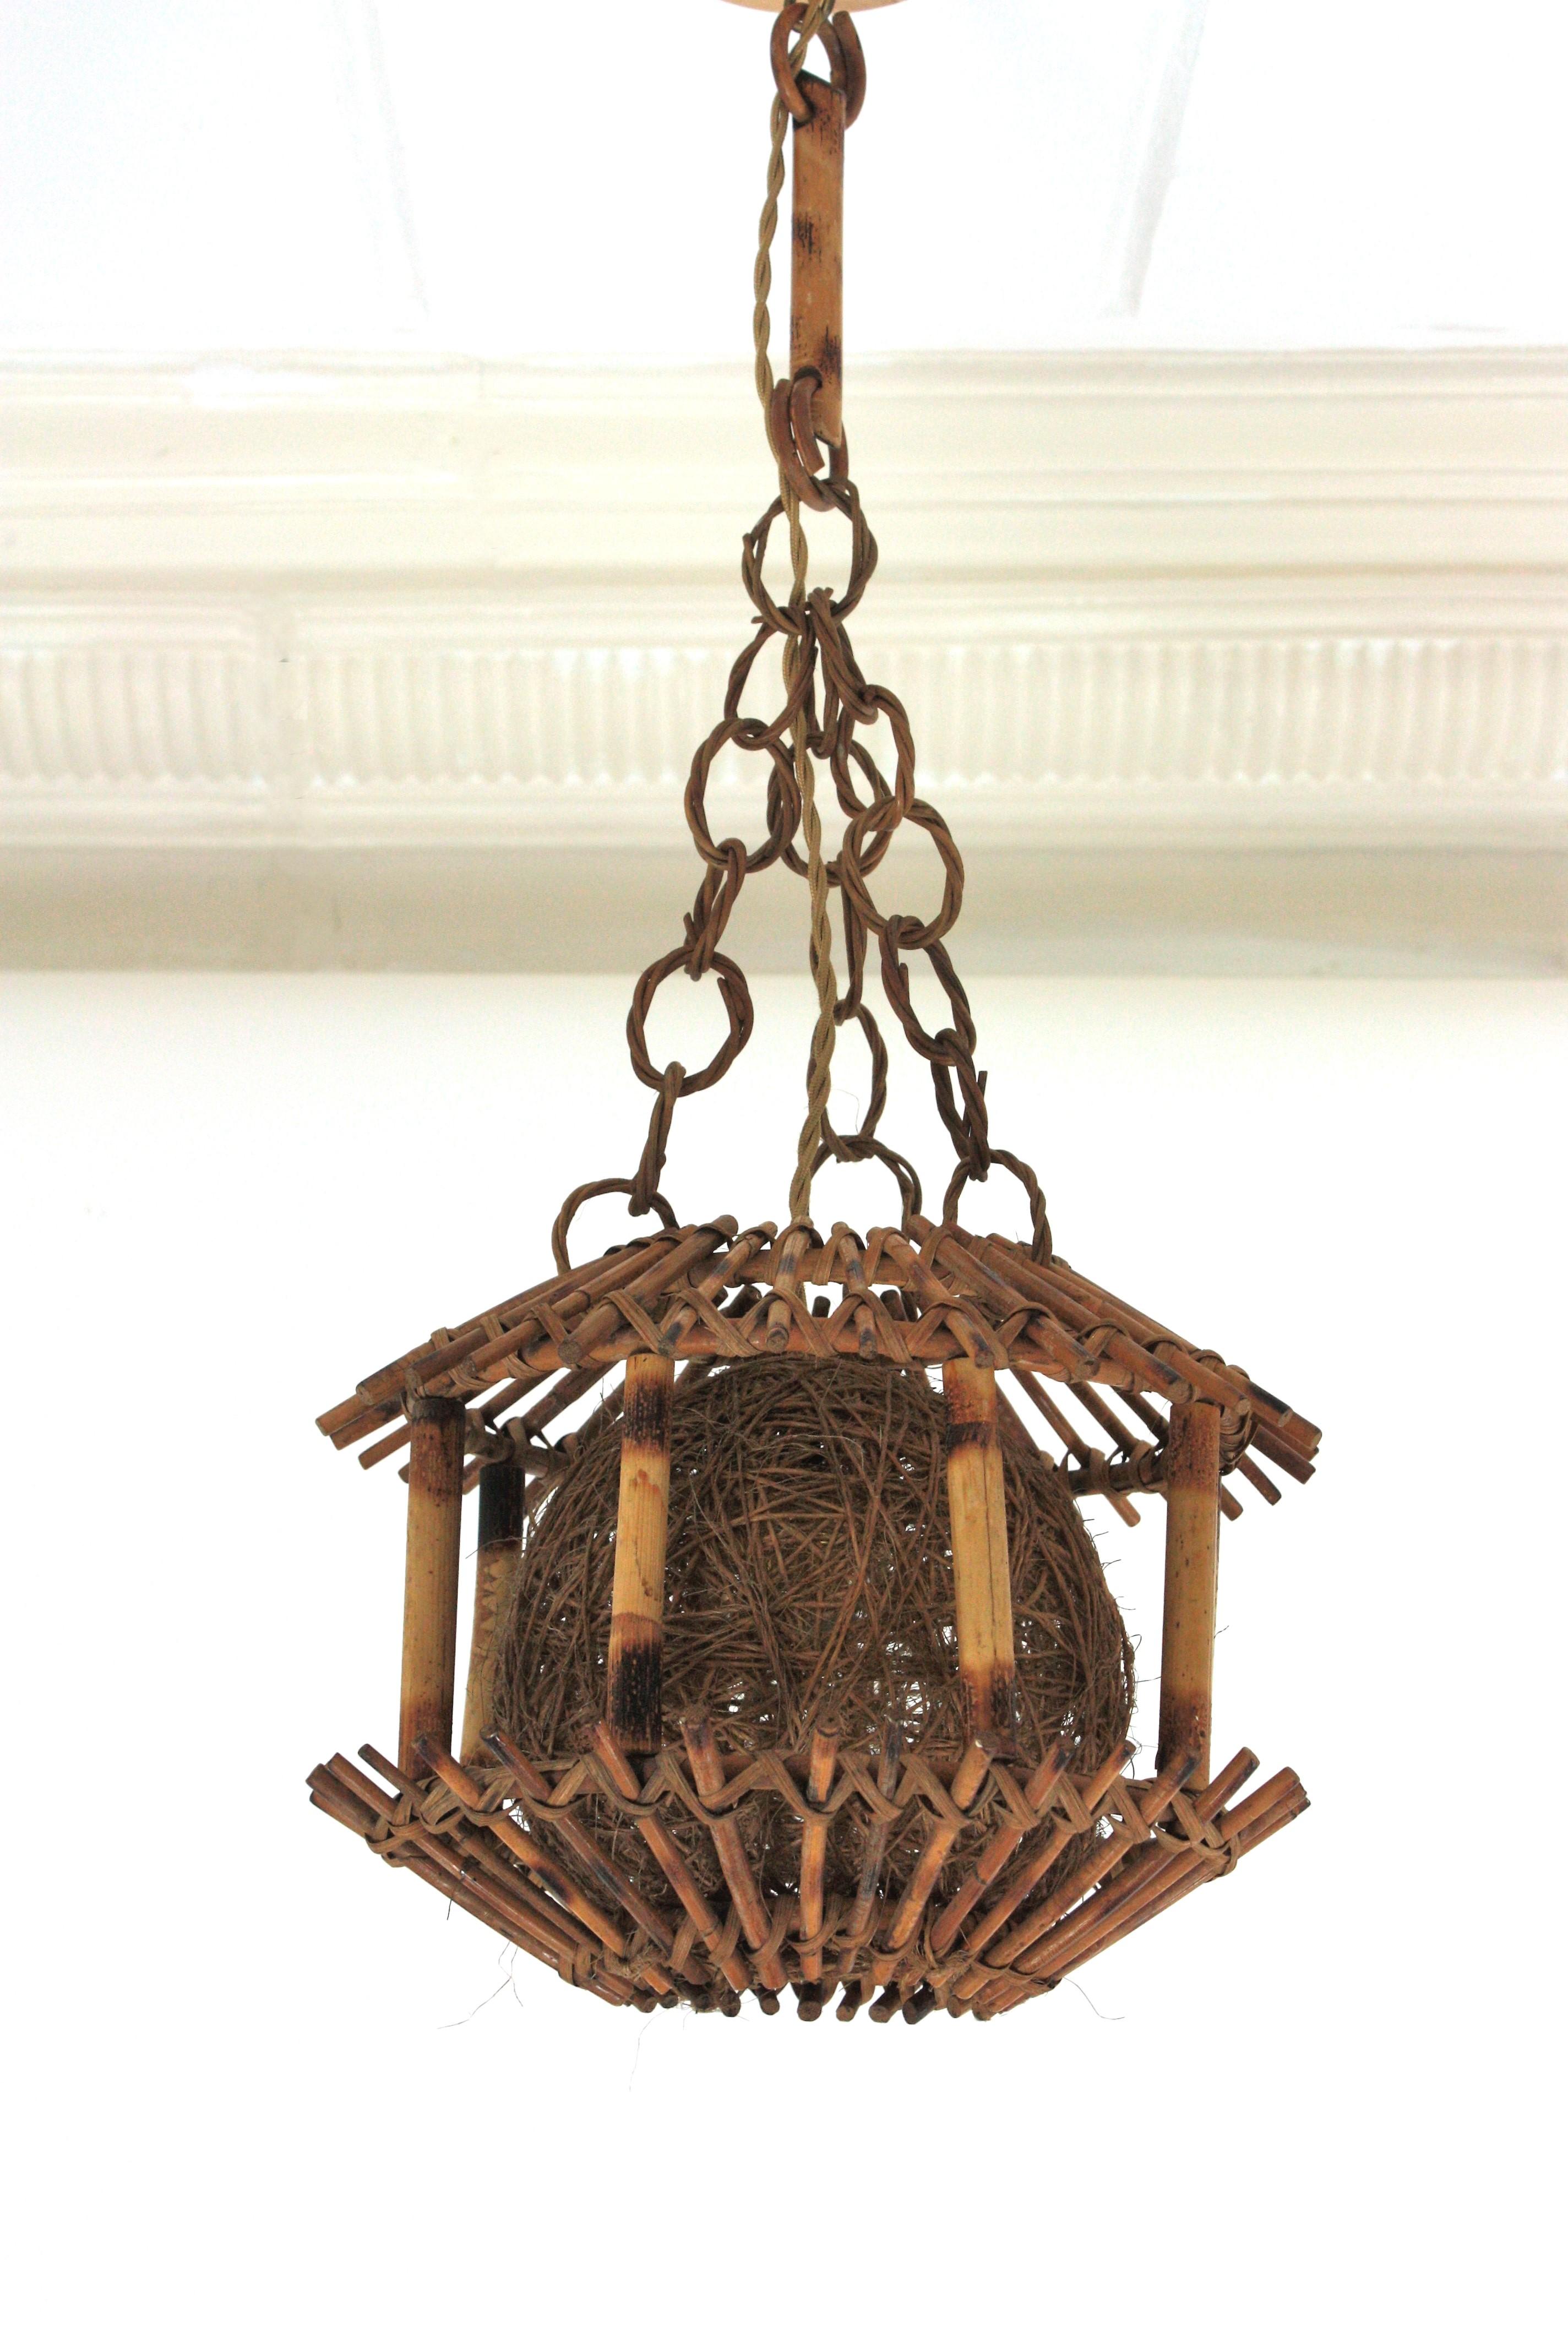 Hand-Crafted Rattan Bamboo Pendant Hanging Light or Lantern with Chinoiserie Accents, 1950s For Sale